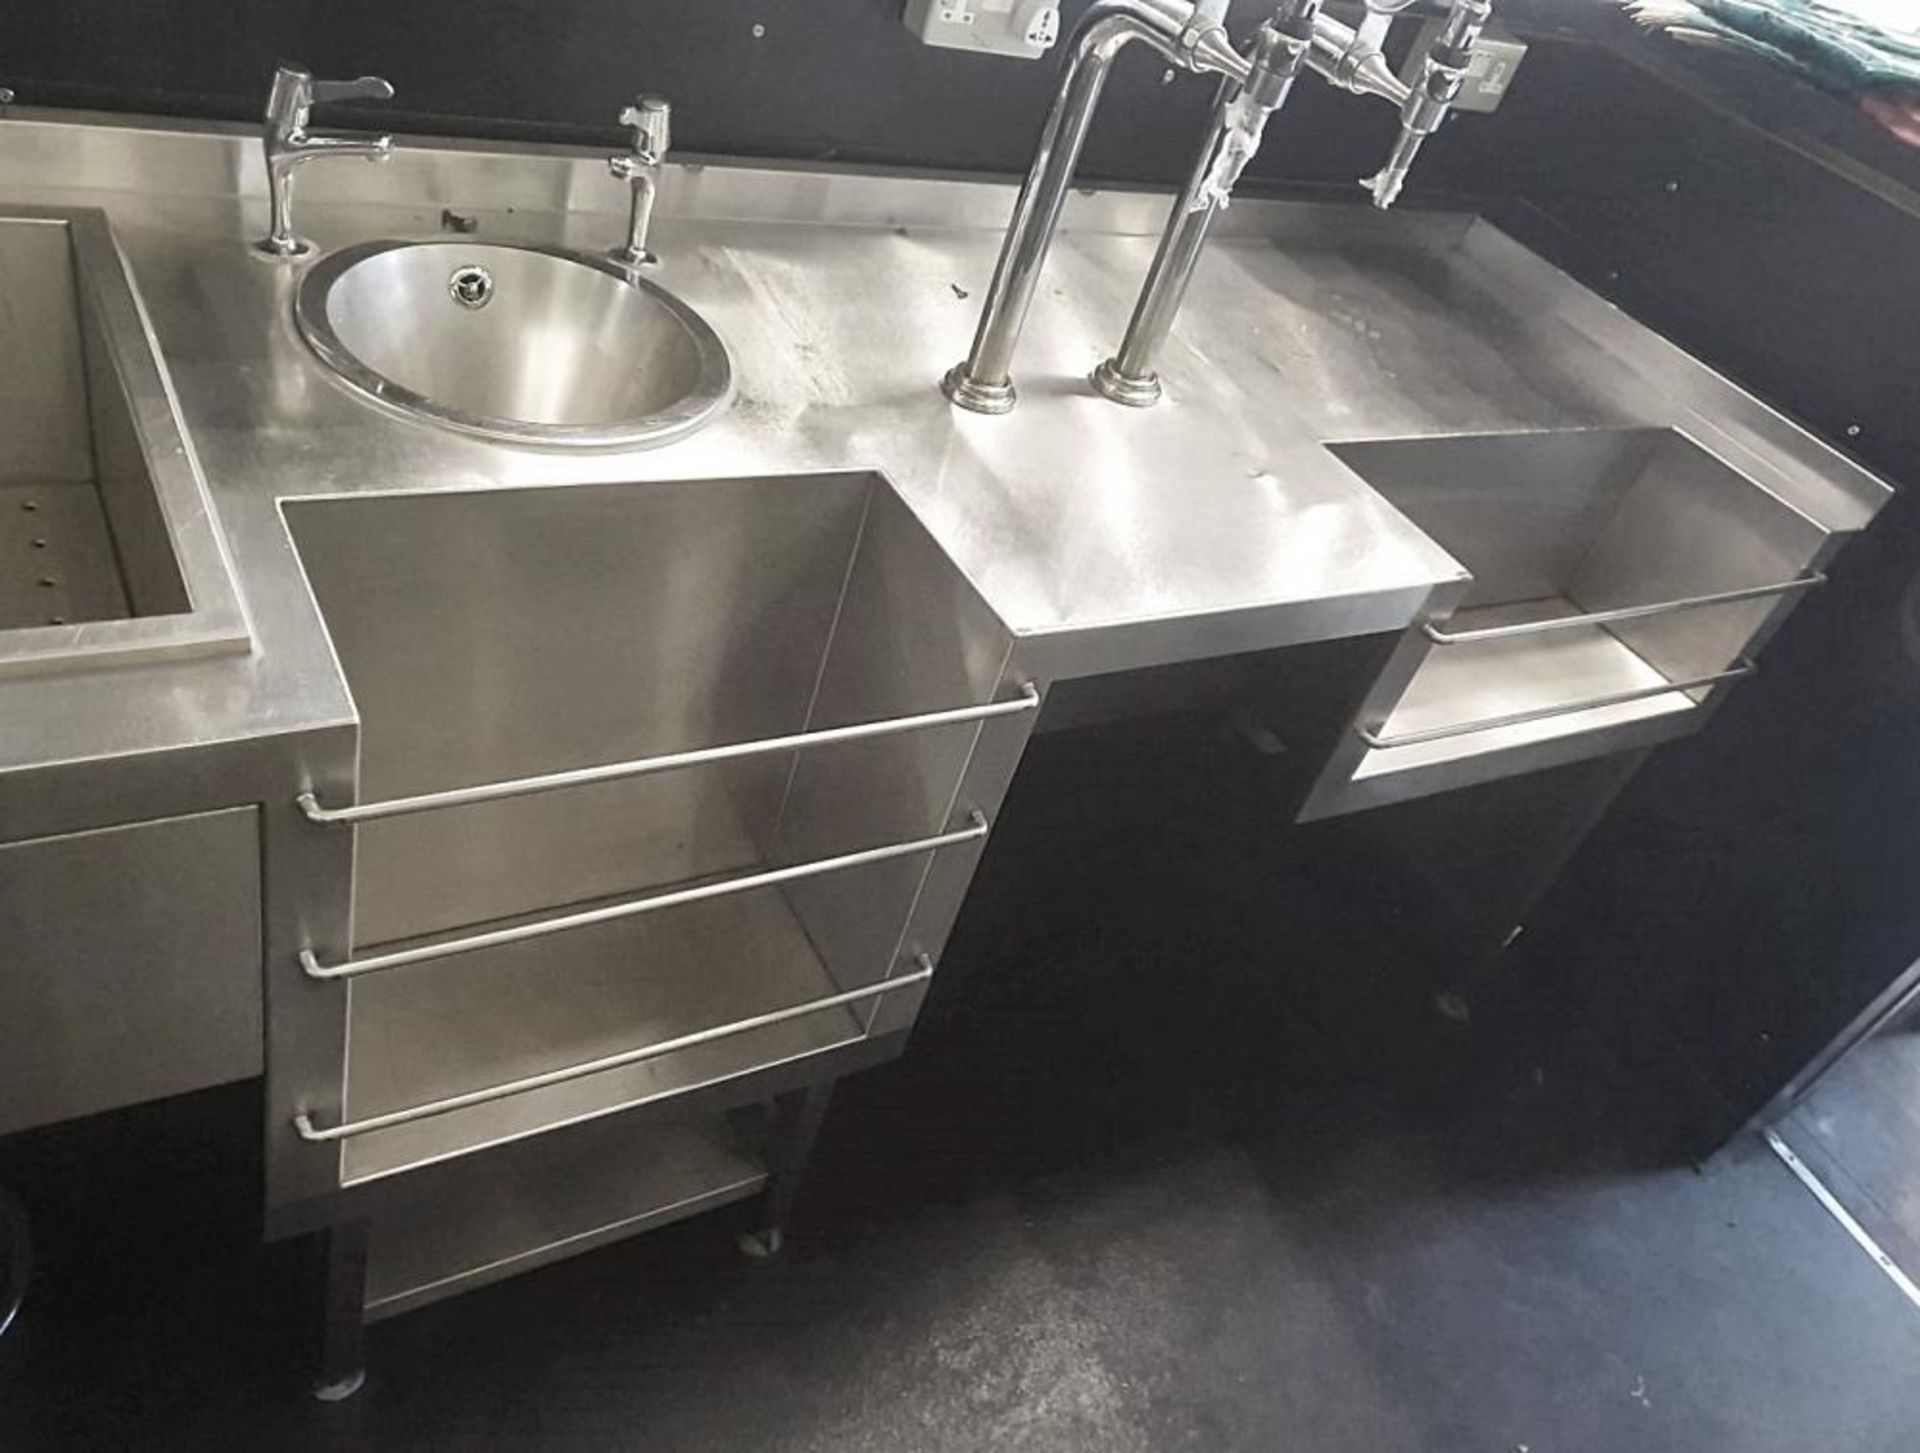 1 x Stainless Steel Back Bar - Features Hand Basins, Ice Wells With Bottle Speed Rails and More - Di - Image 3 of 10